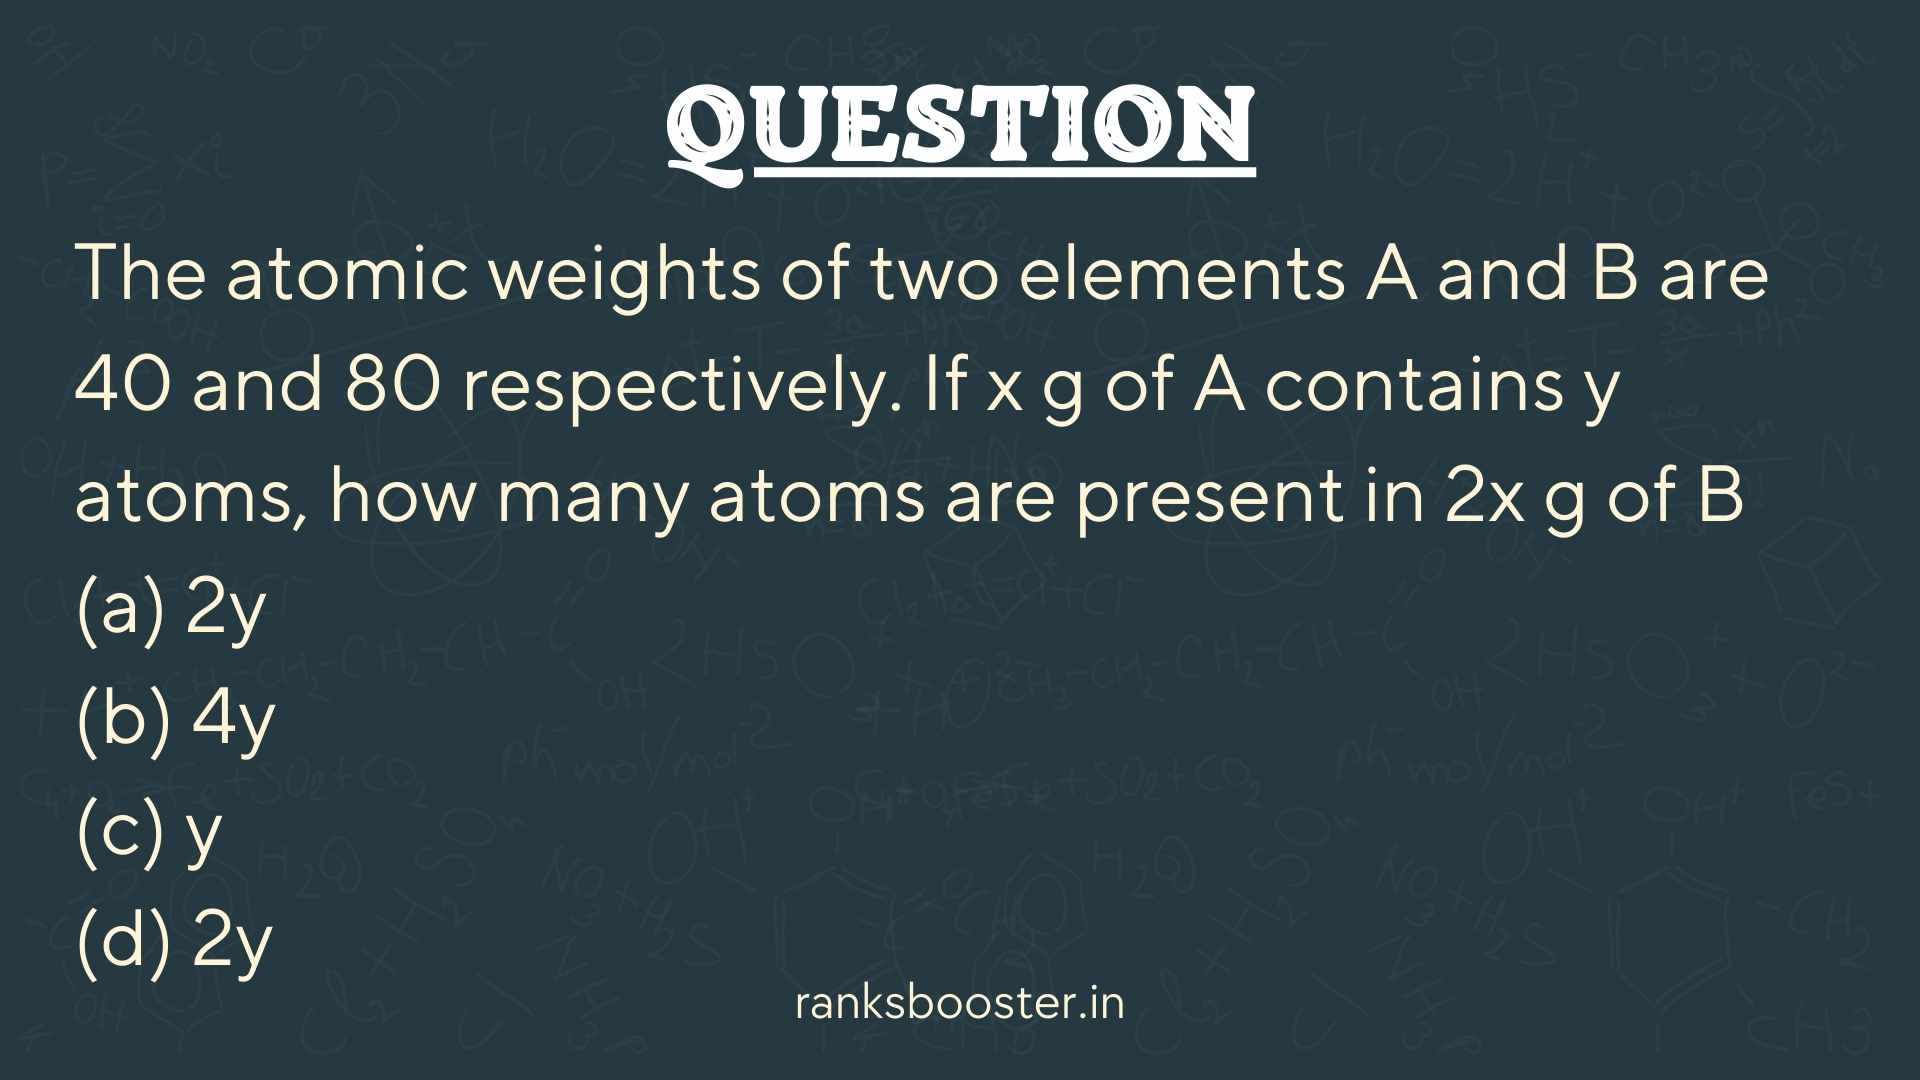 Question: The atomic weights of two elements A and B are 40 and 80 respectively. If x g of A contains y atoms, how many atoms are present in 2x g of B (a) 2y (b) 4y (c) y (d) 2y